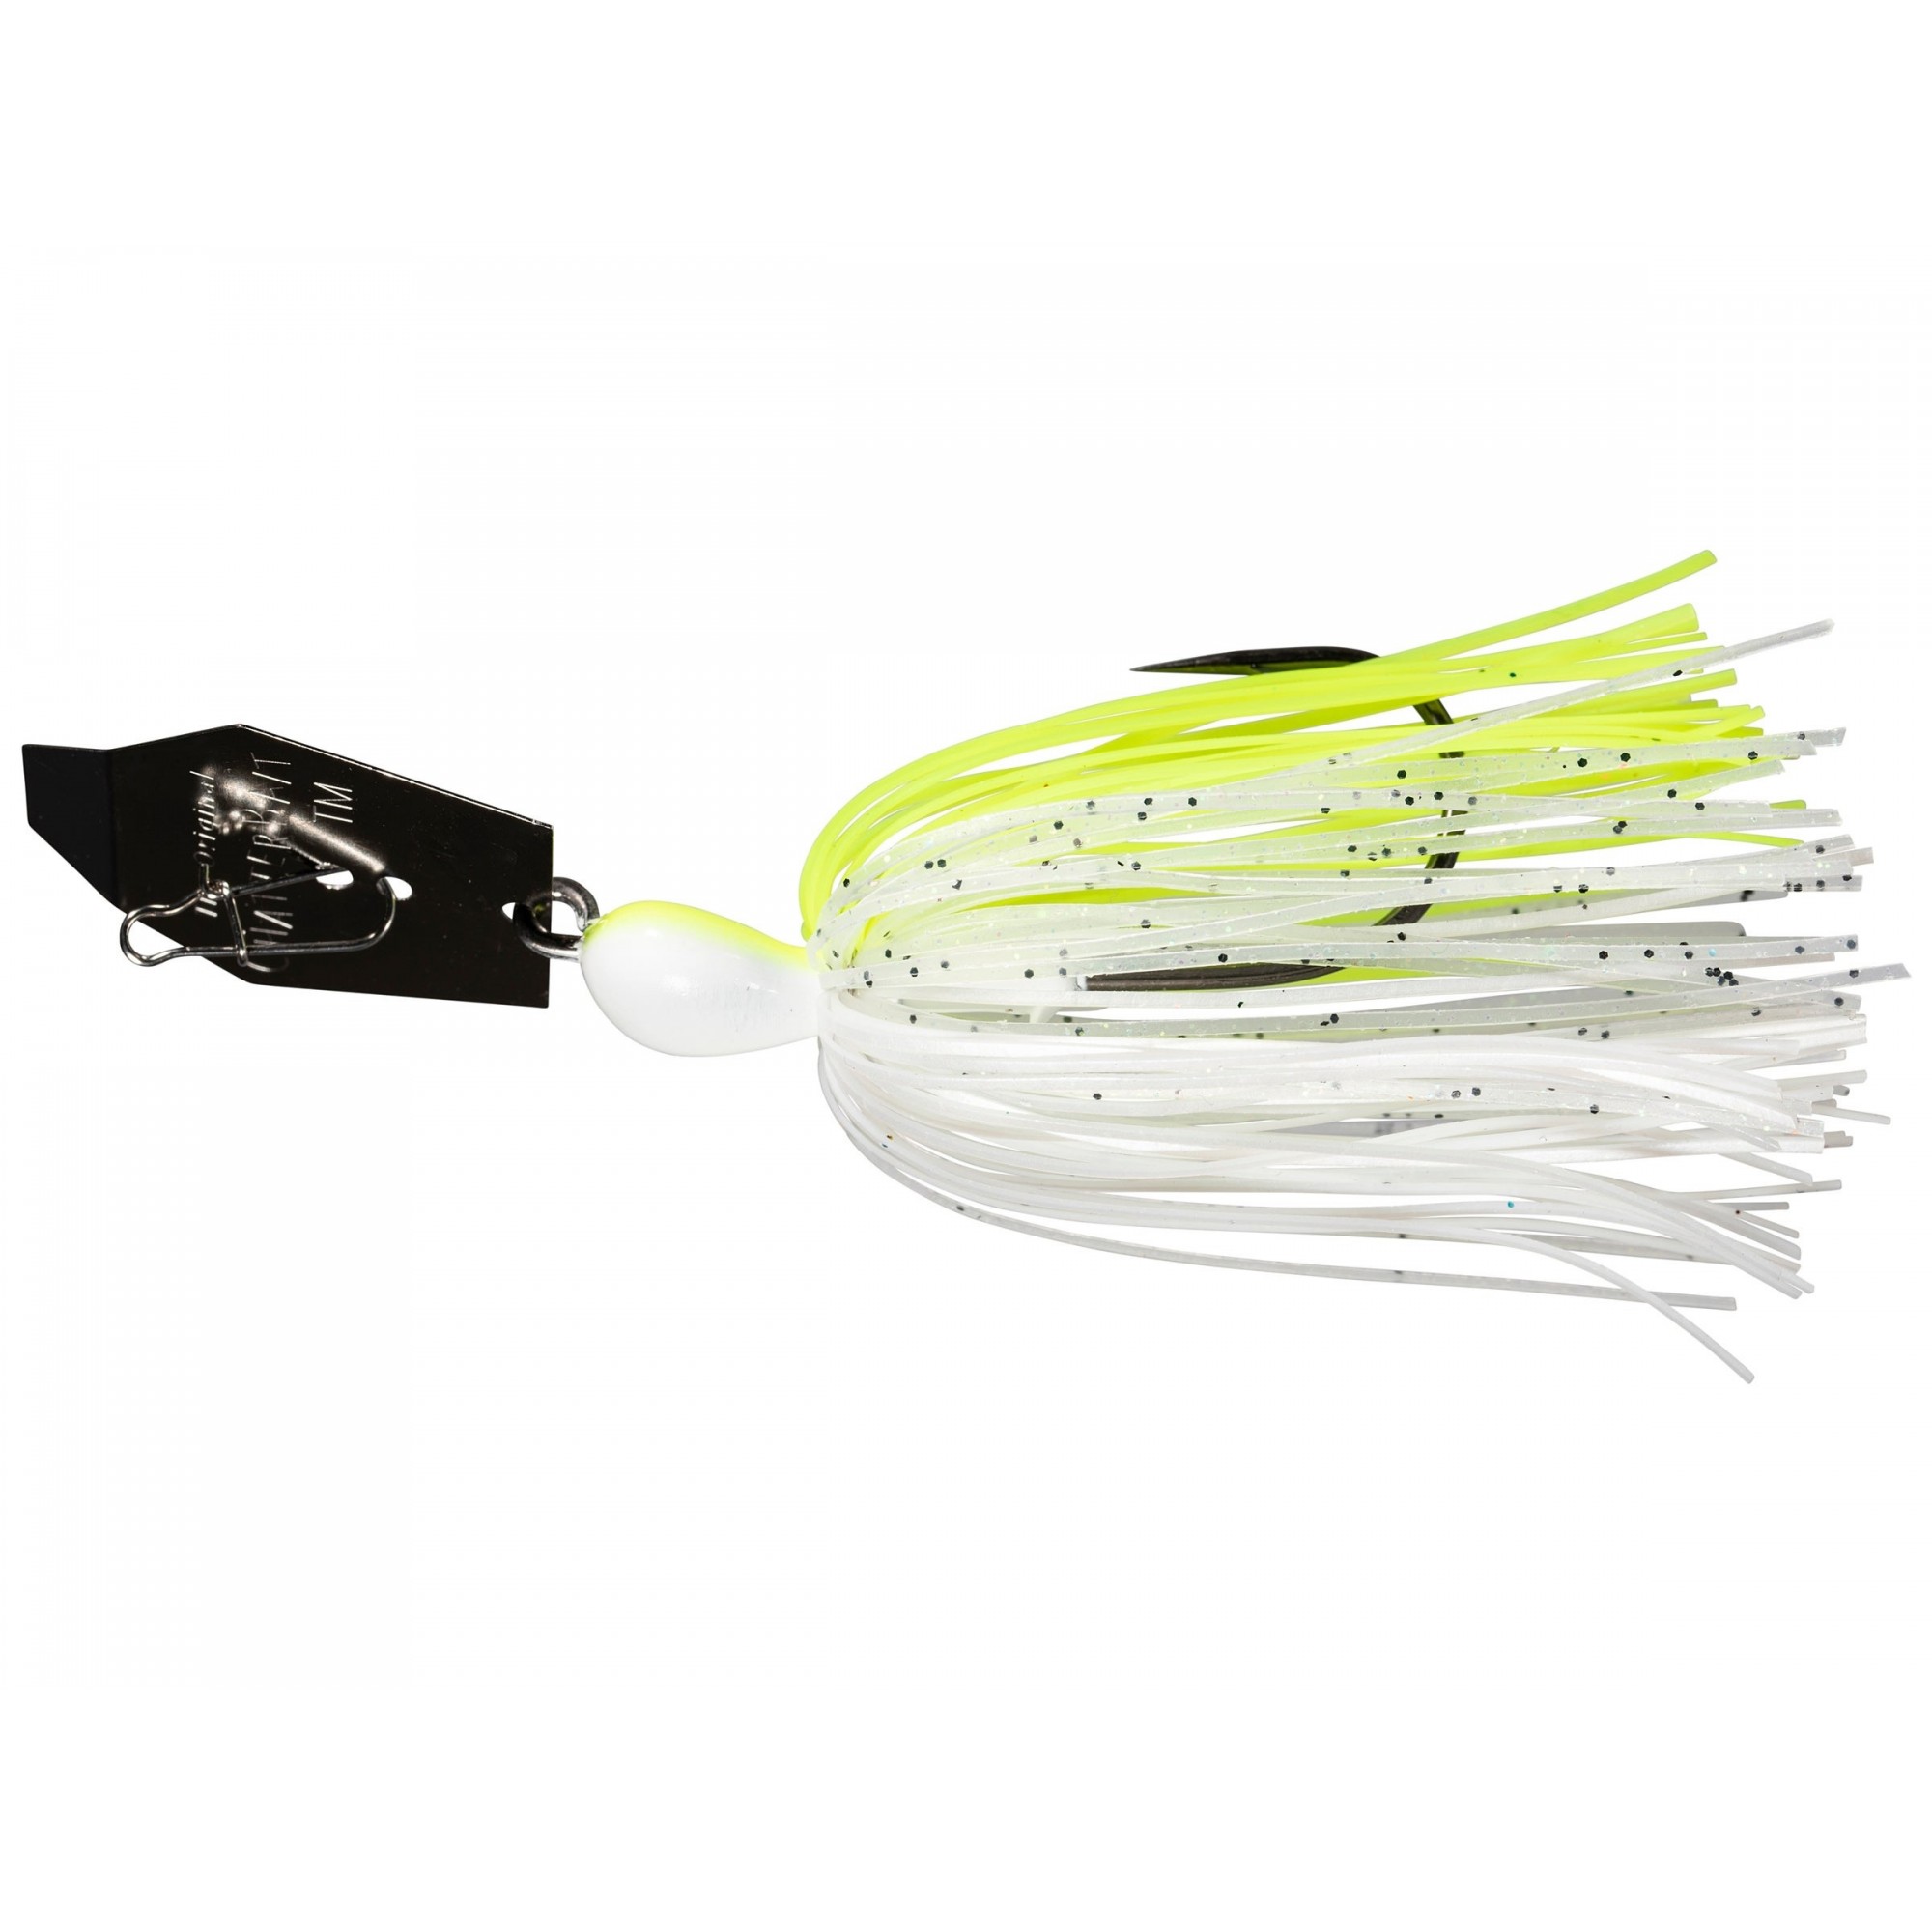 Esche-metalliche-chatterbait-chatter-bladed-jig-z-man-big-blade-chatterbait-04-chartreuse-white-lure-fishing-planet.